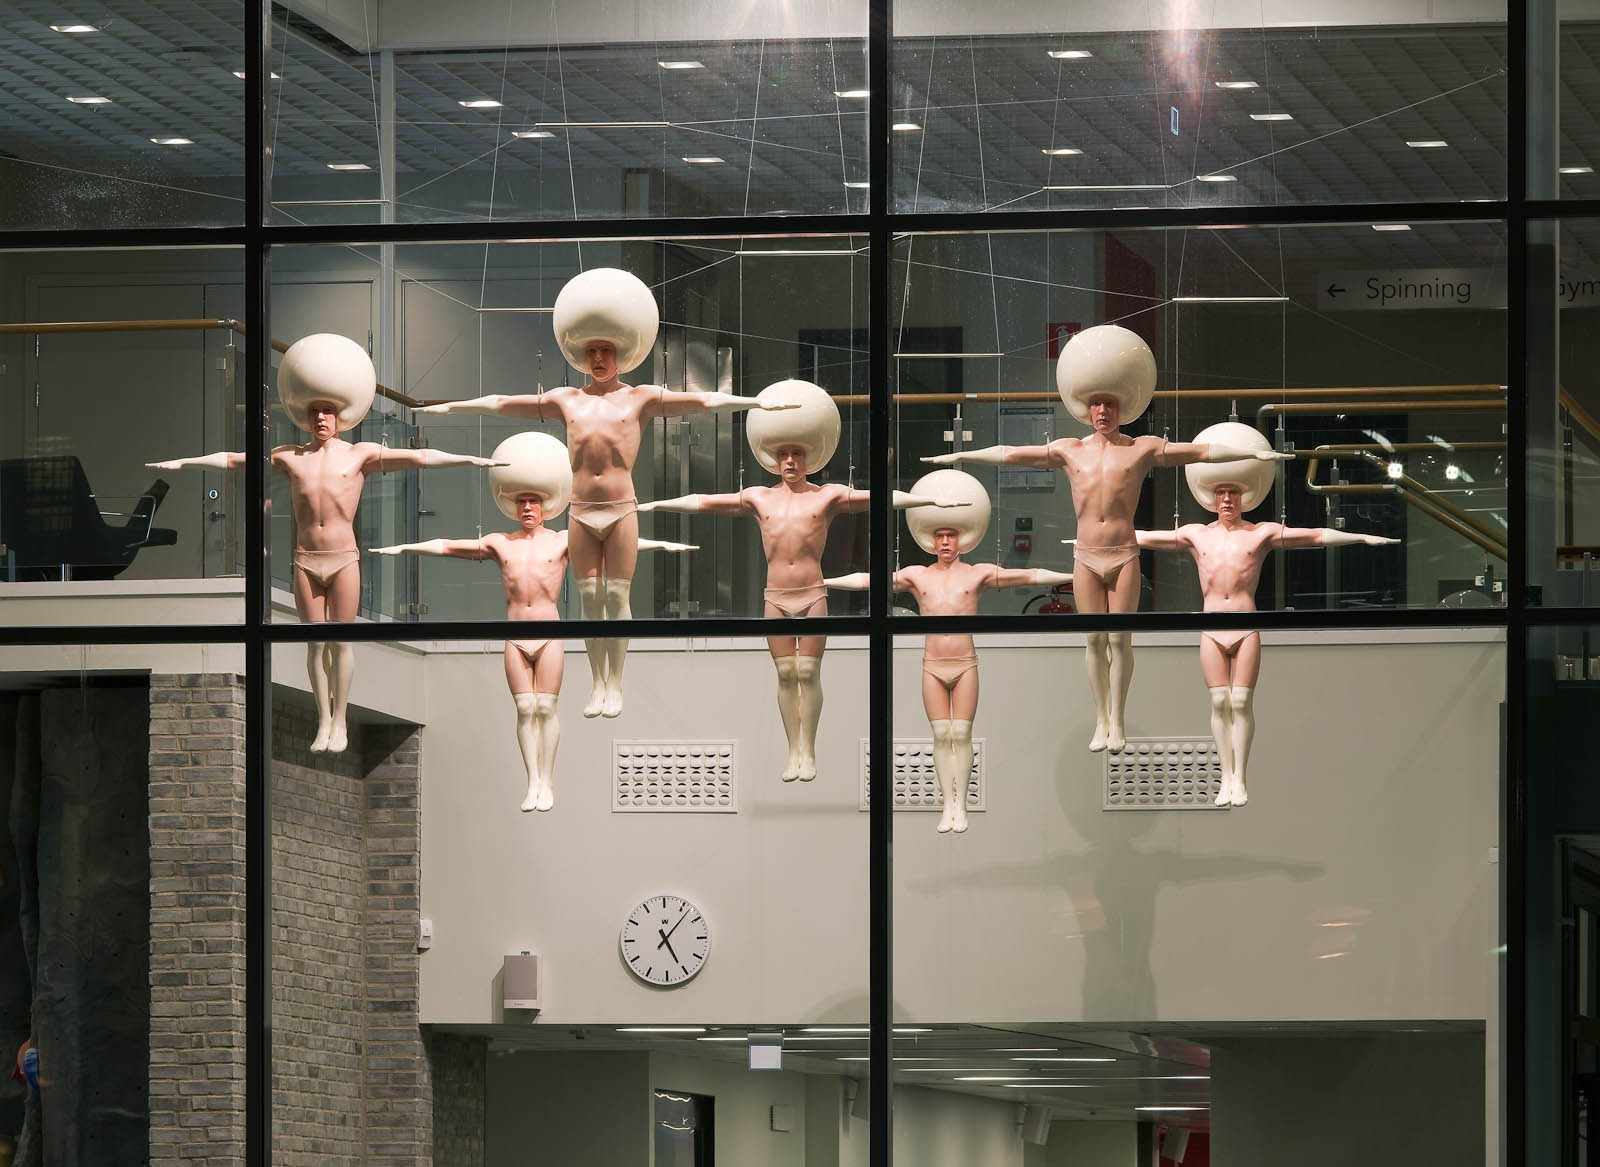 Seven sculptures in plastic by men dressed in white underwear wearing helmets. They are hanging in the air.